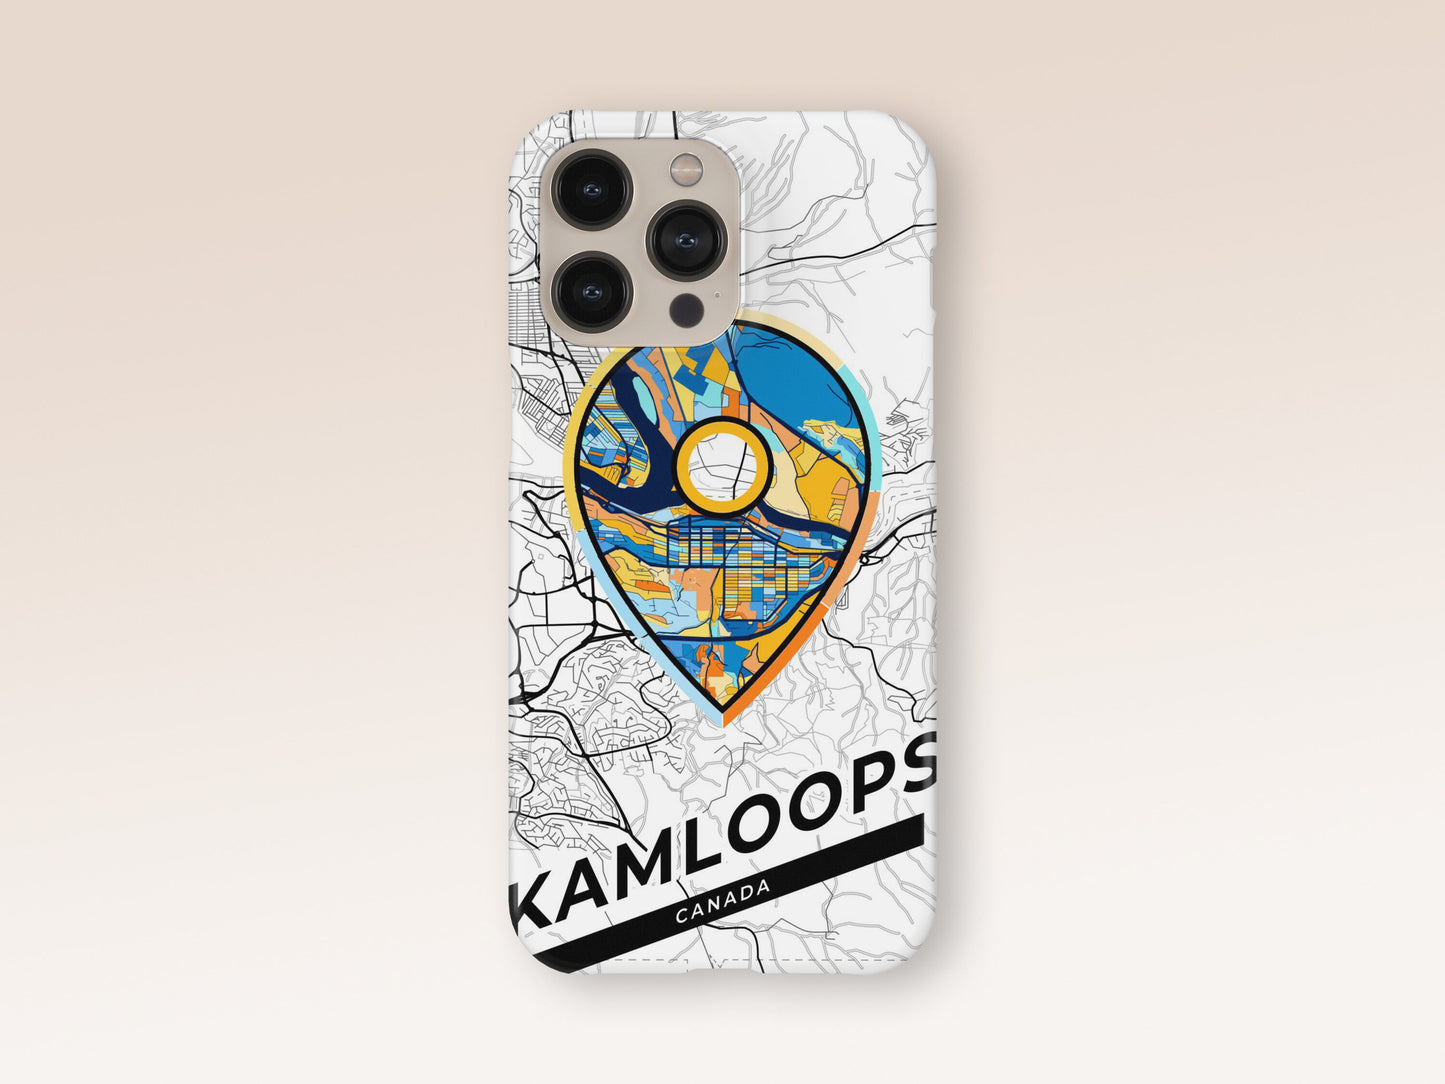 Kamloops Canada slim phone case with colorful icon. Birthday, wedding or housewarming gift. Couple match cases. 1